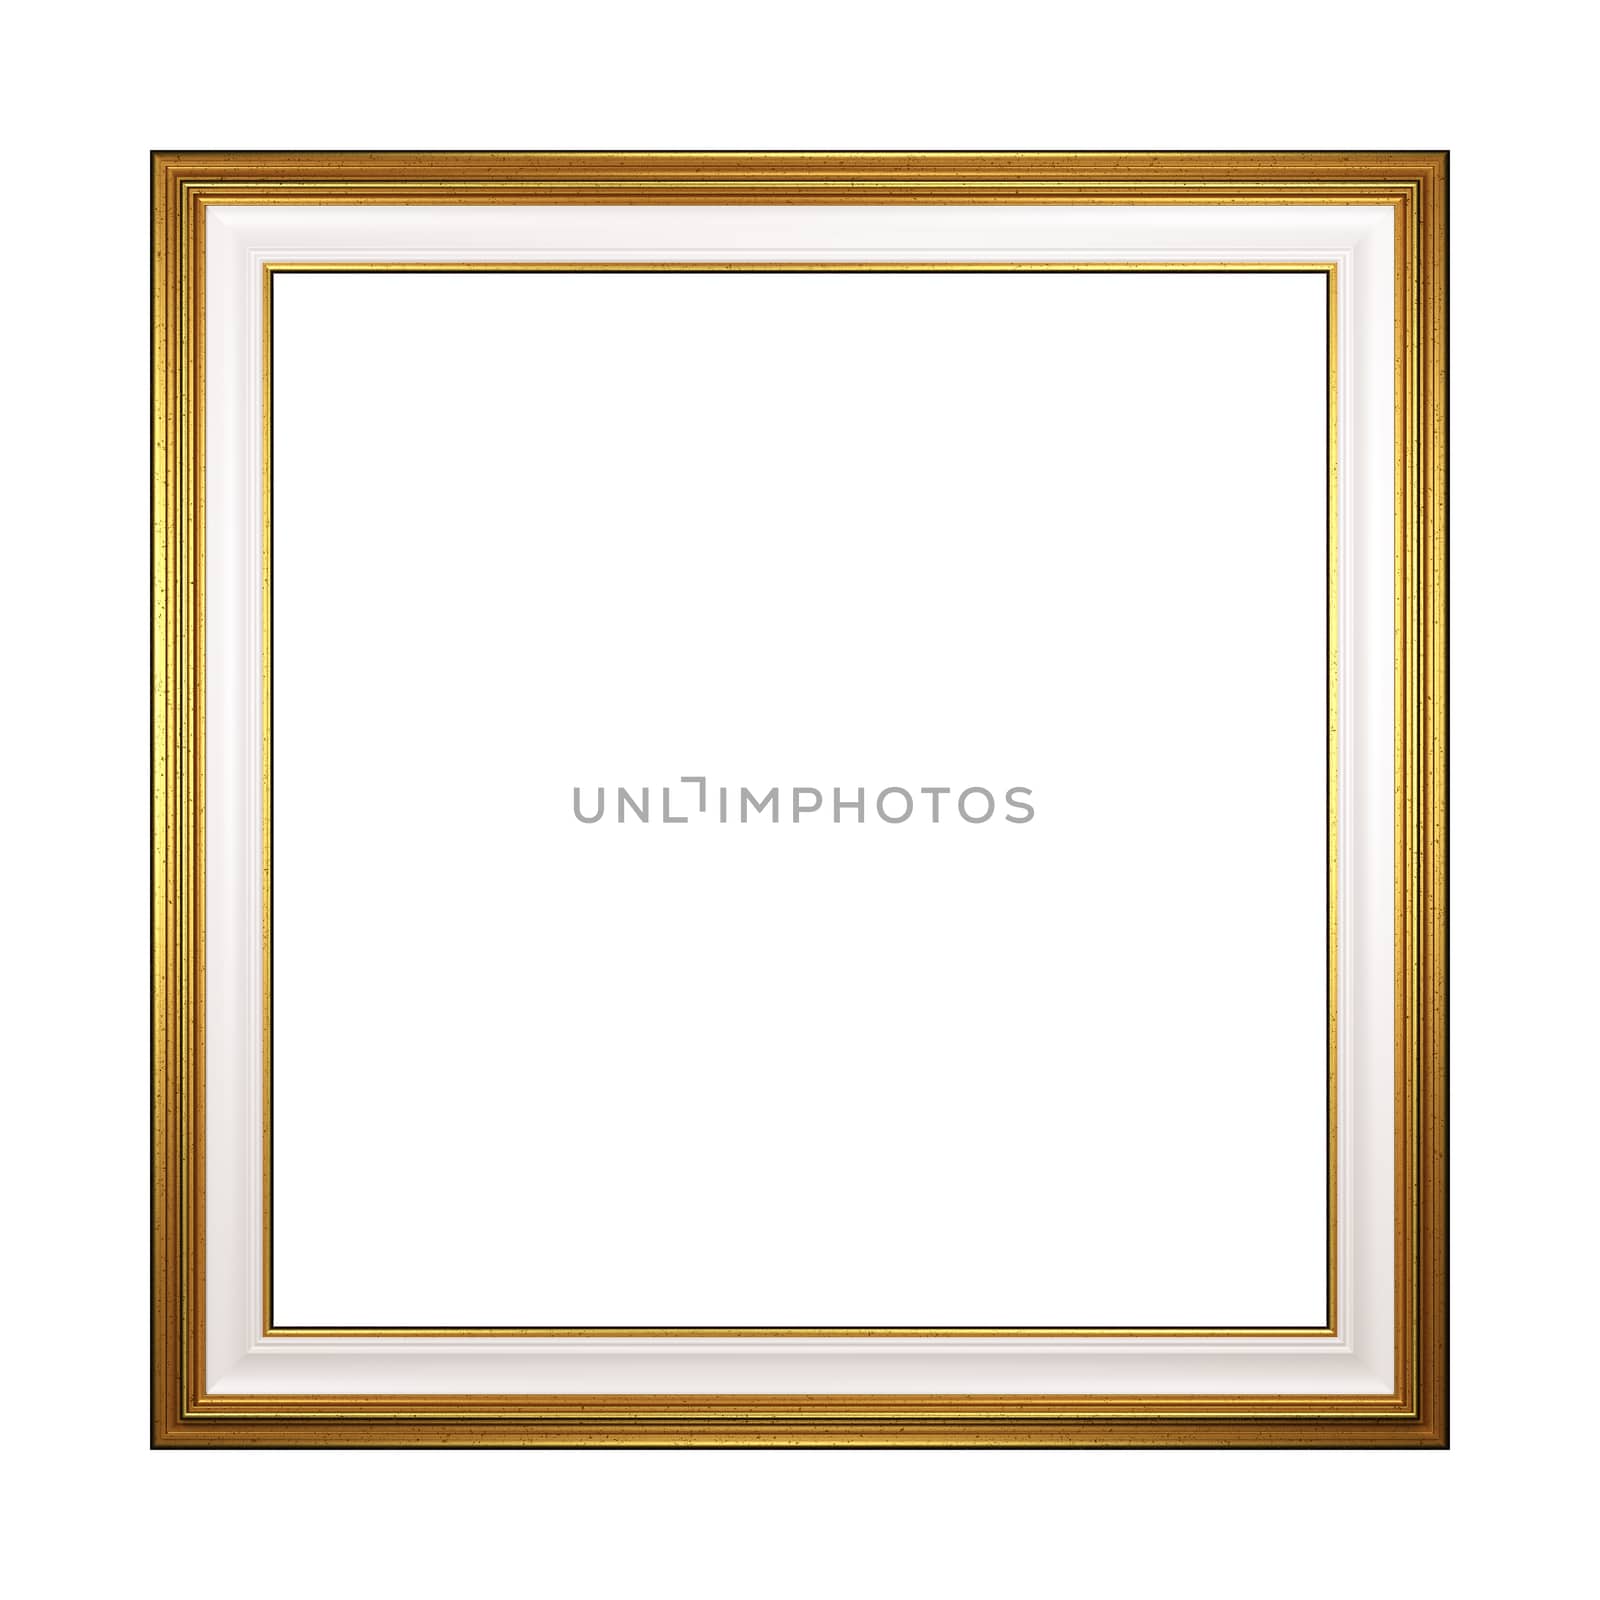 Classic Square Empty Golden Picture Frame Isolated on White Background 3D Render